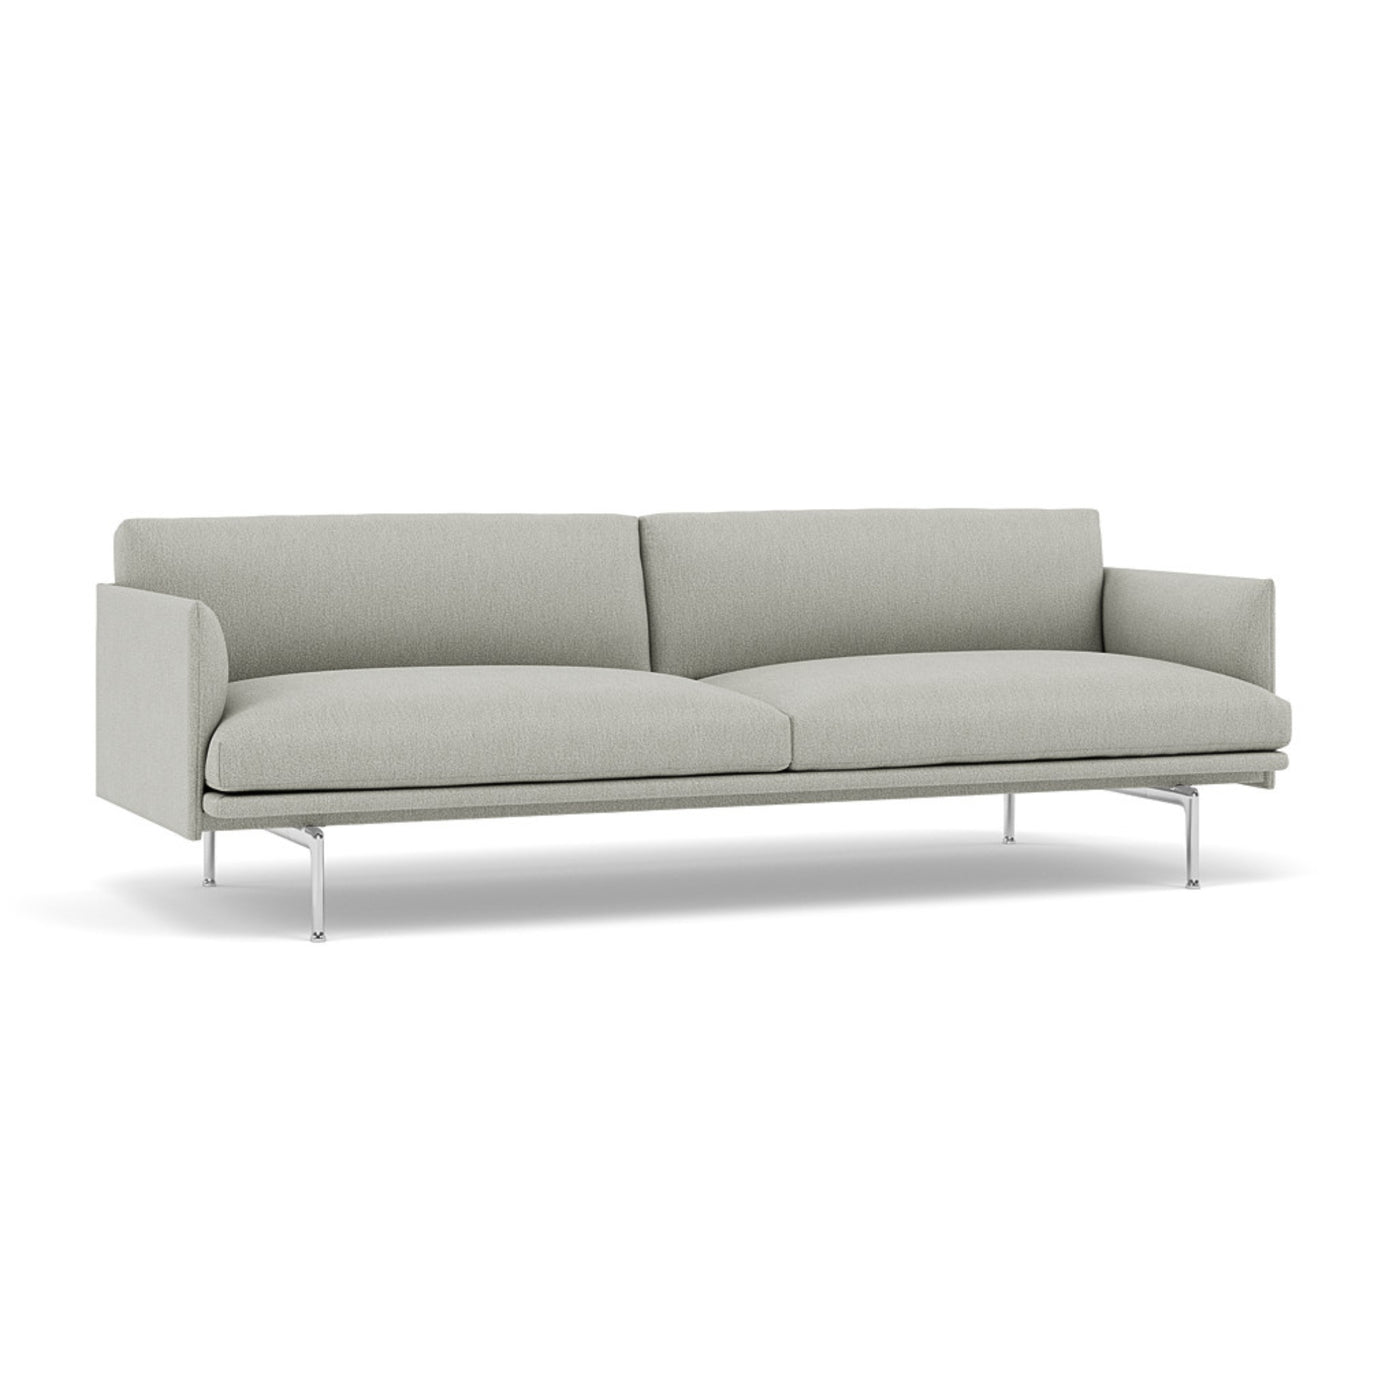 Muuto Outline 3 Seater. Made to order at someday designs. #colour_clay-12